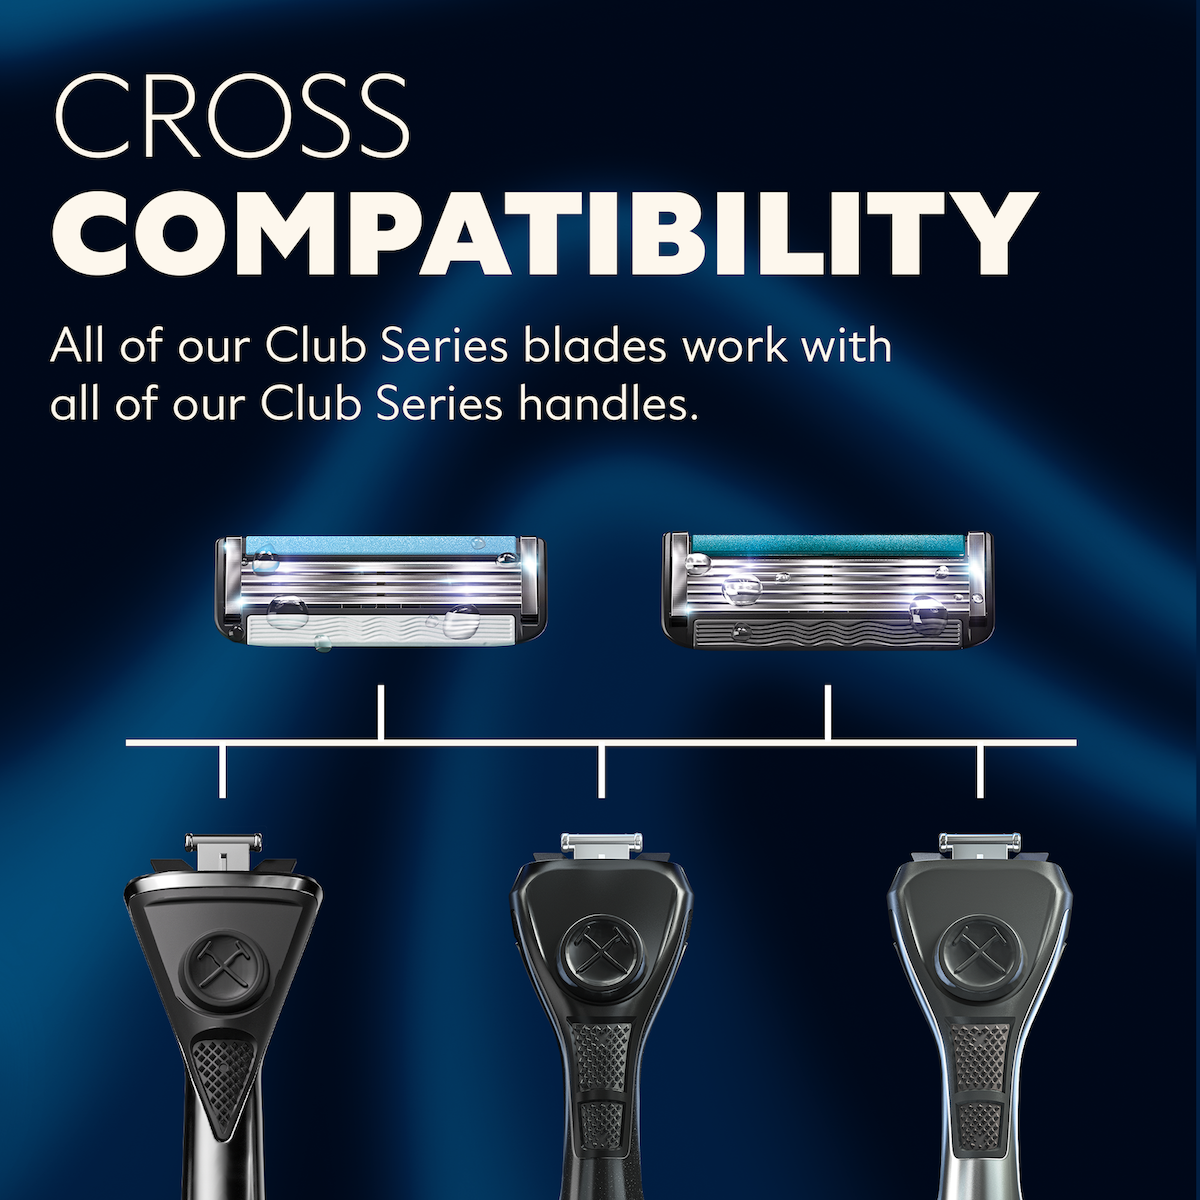 All of the Dollar Shave Club Club Series razors are compatible with all Club Series handles.